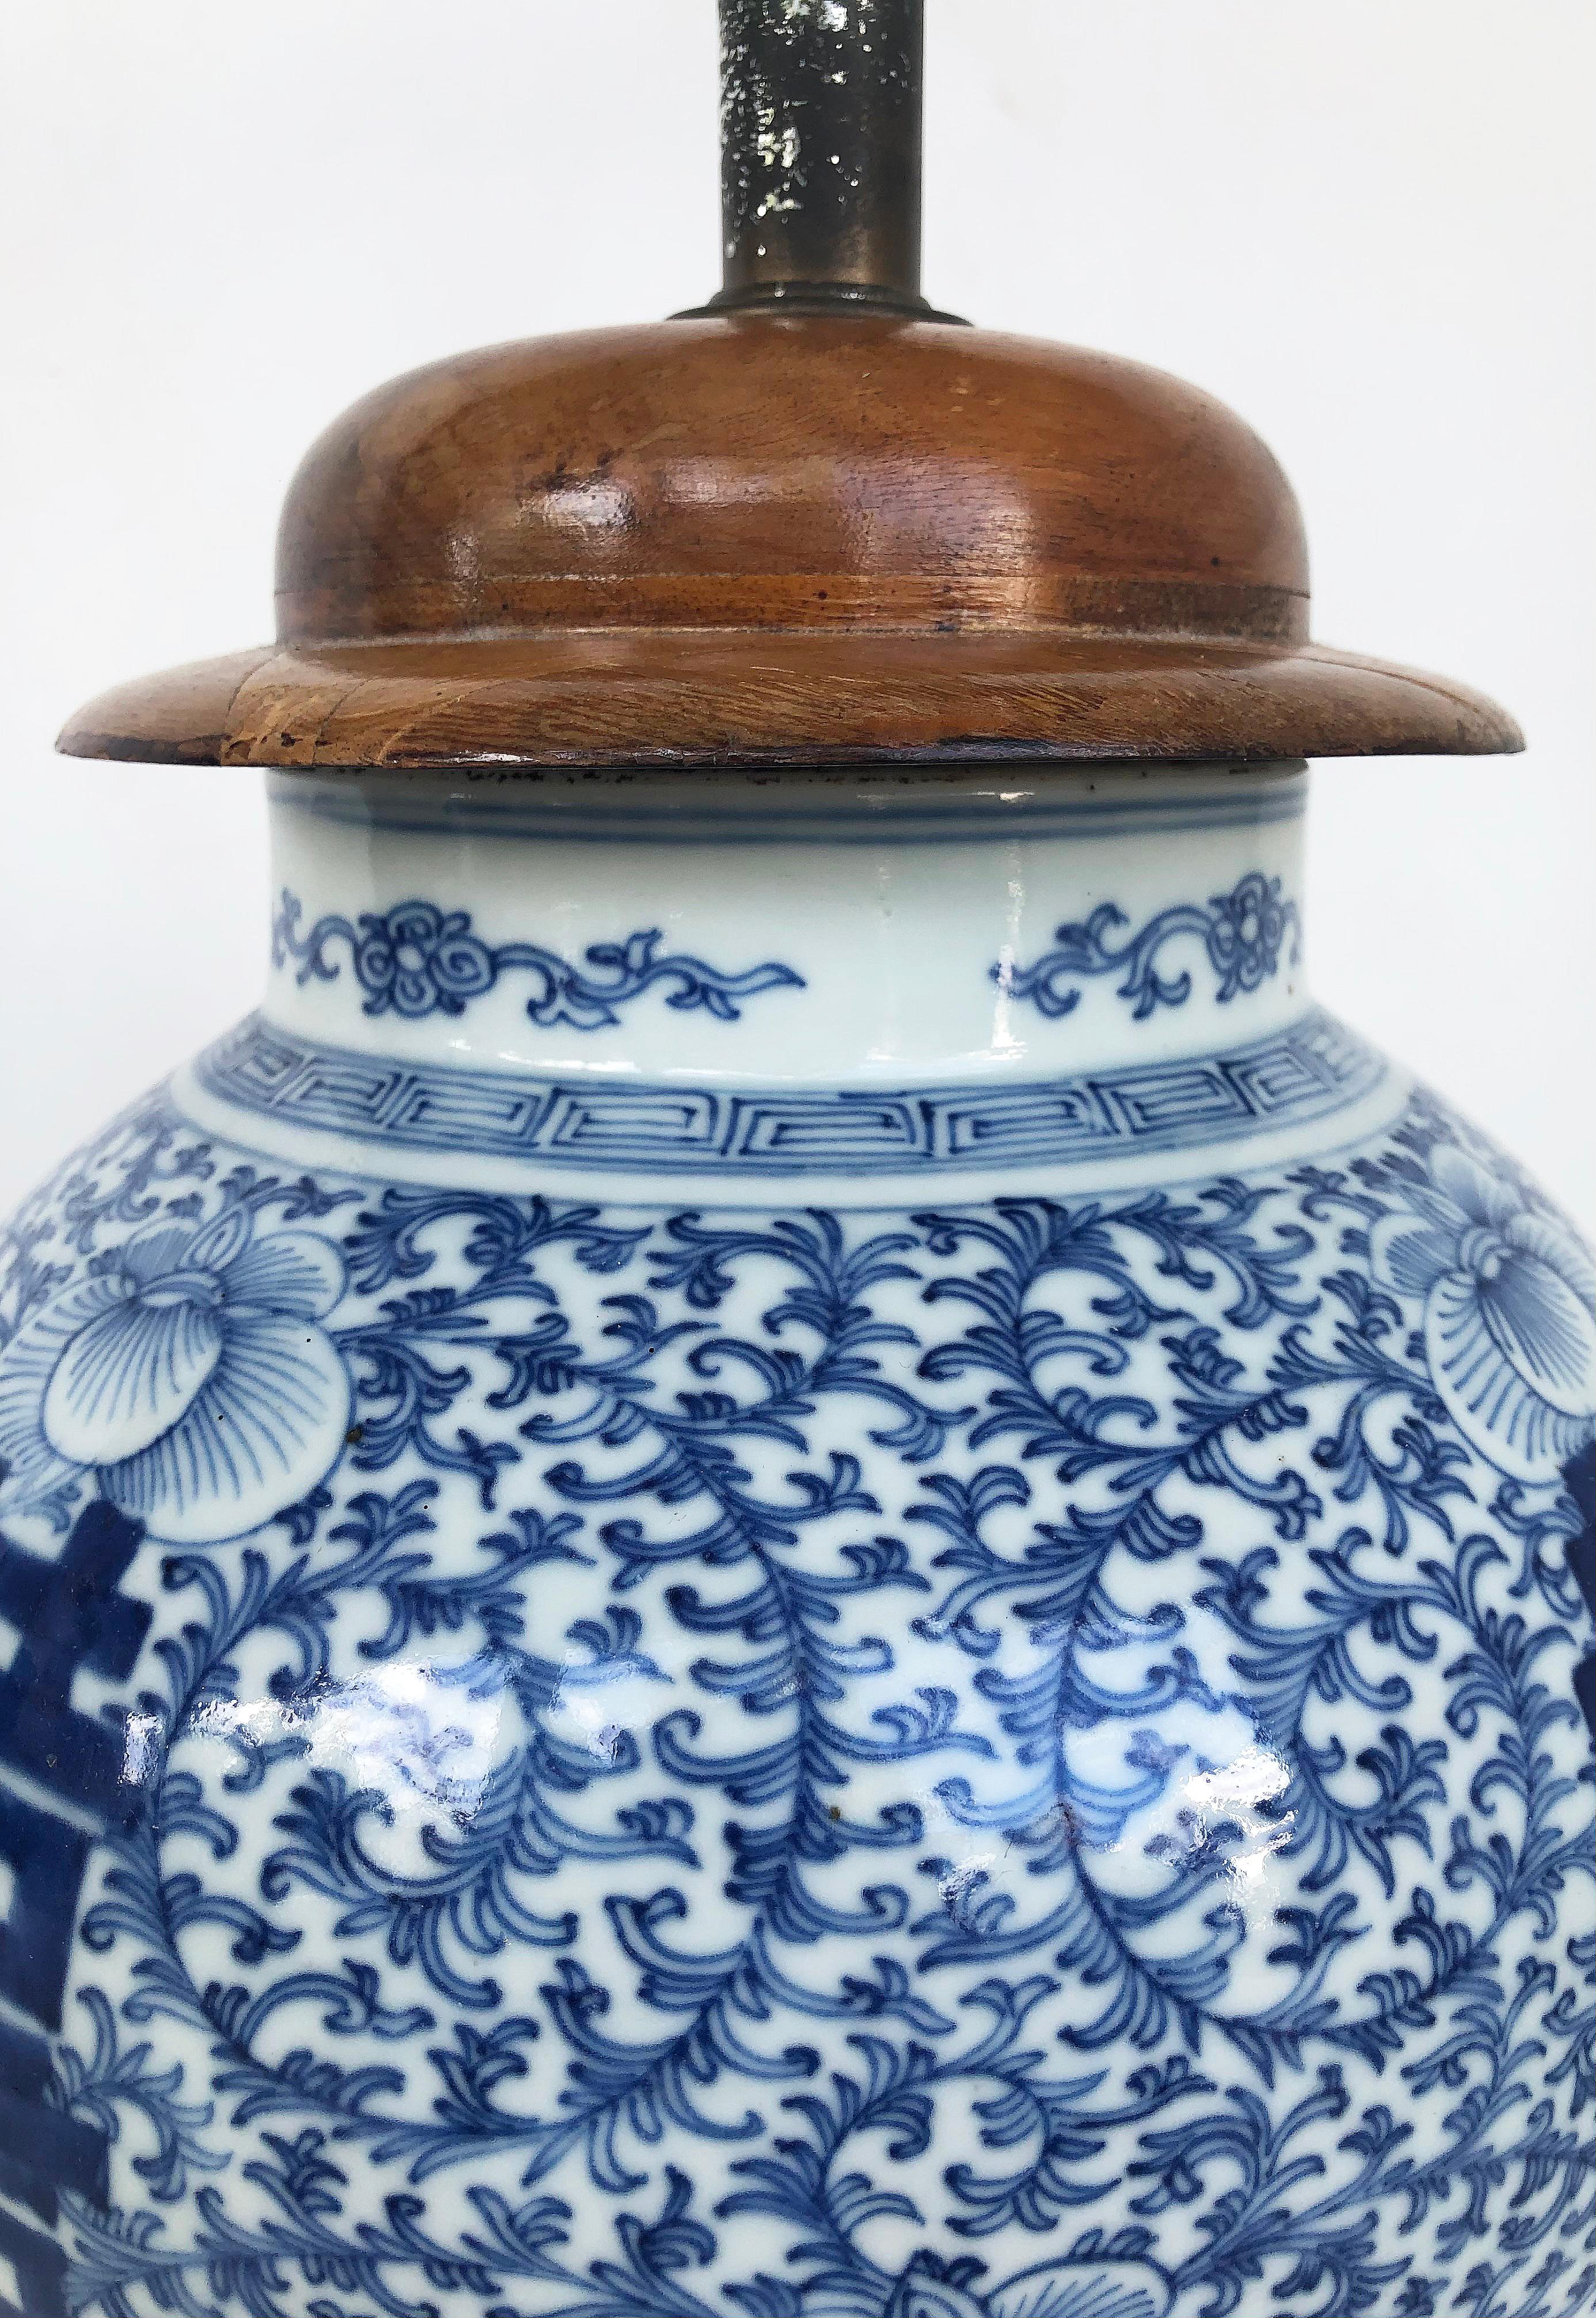 Glazed Chinese Blue & White Porcelain Ginger Jar Table Lamps with Ebonized Wood Stands